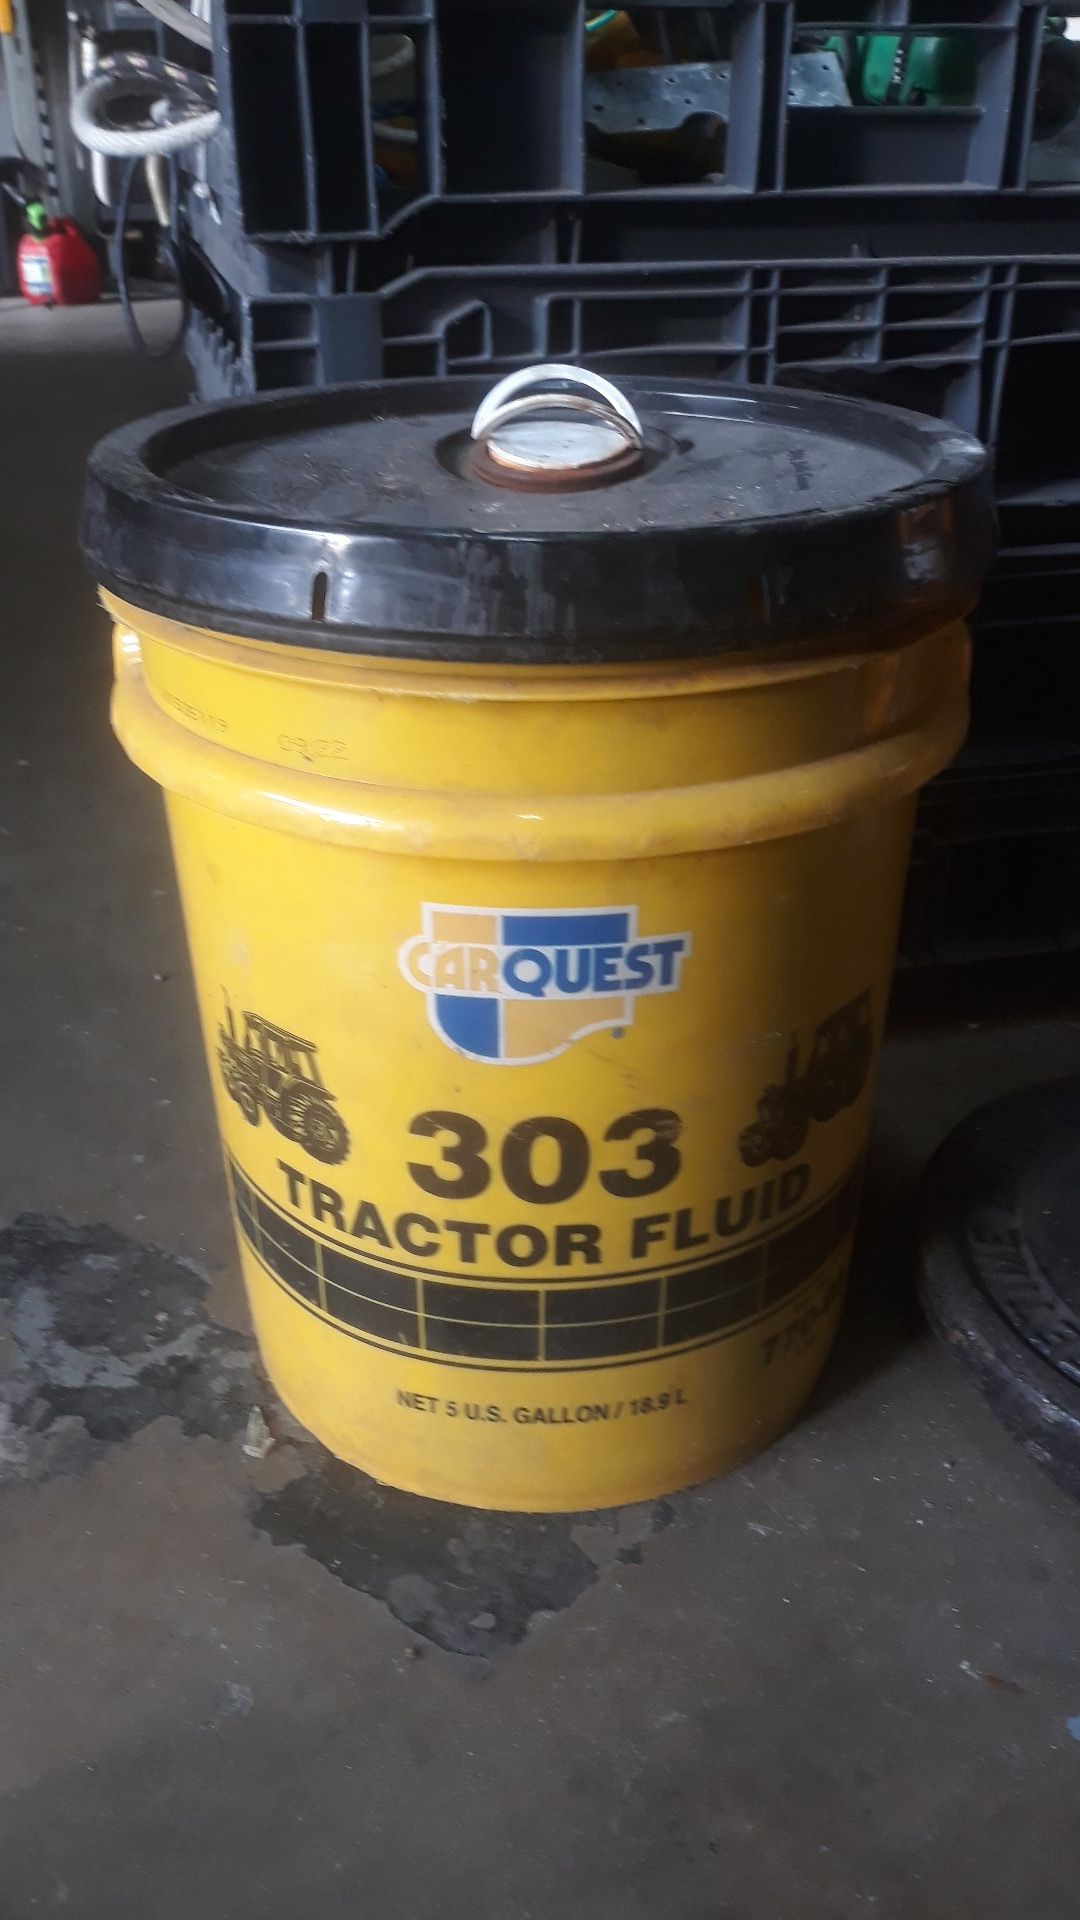 Tractor fluid 303 5 gallons tank never used